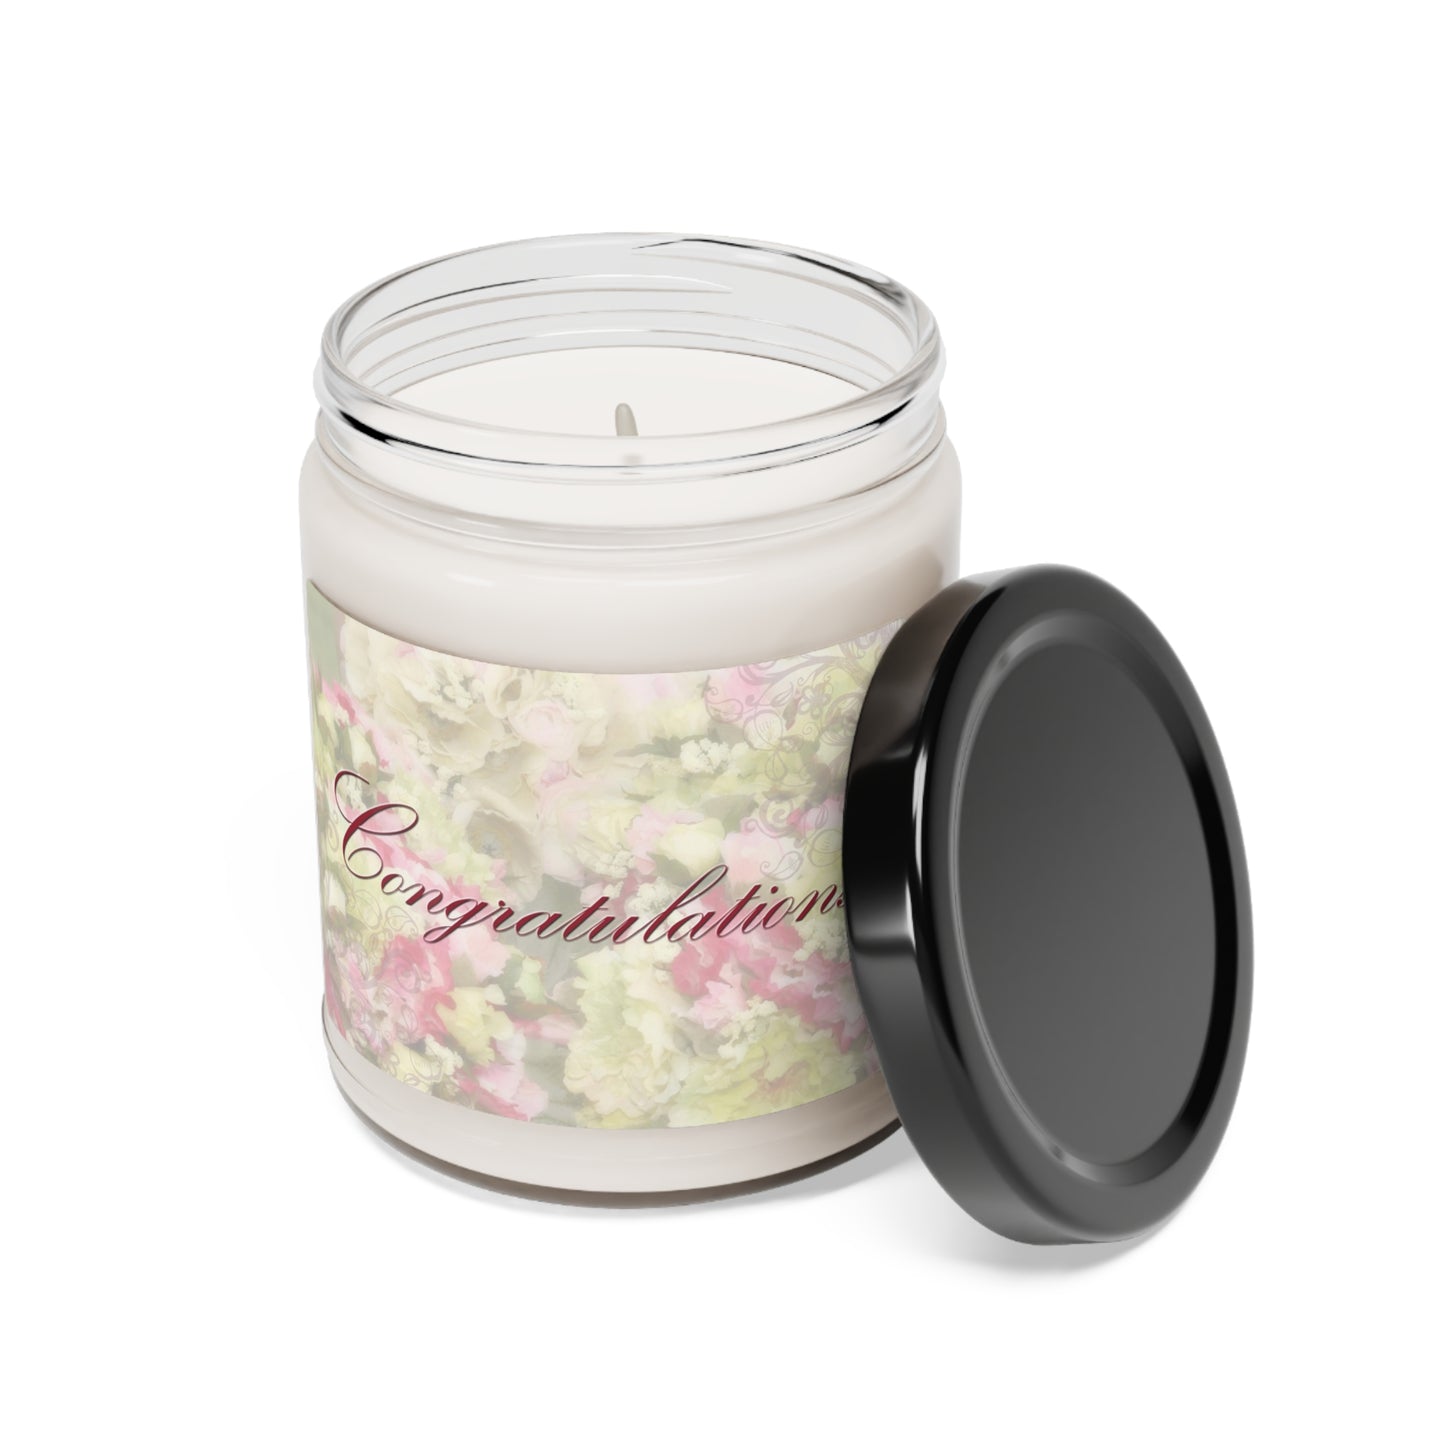 Congratulations Candle  Wedding  Candle  Baby Shower Scented Soy Candle, 9oz